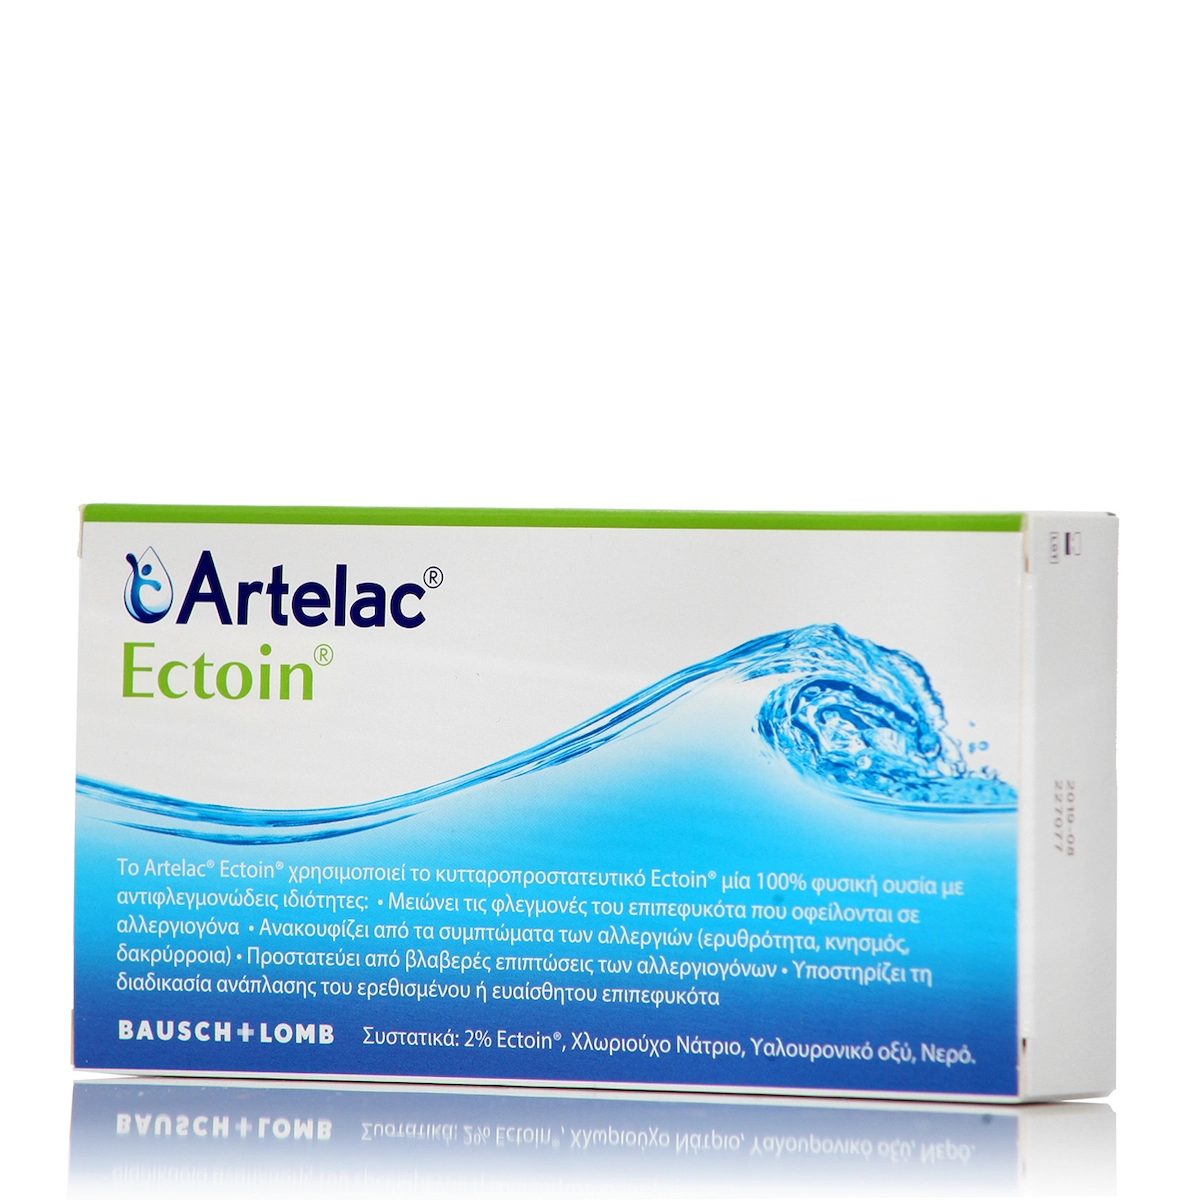 Artelac Ectoin Eye Drops in ampoules 20X0,5ml